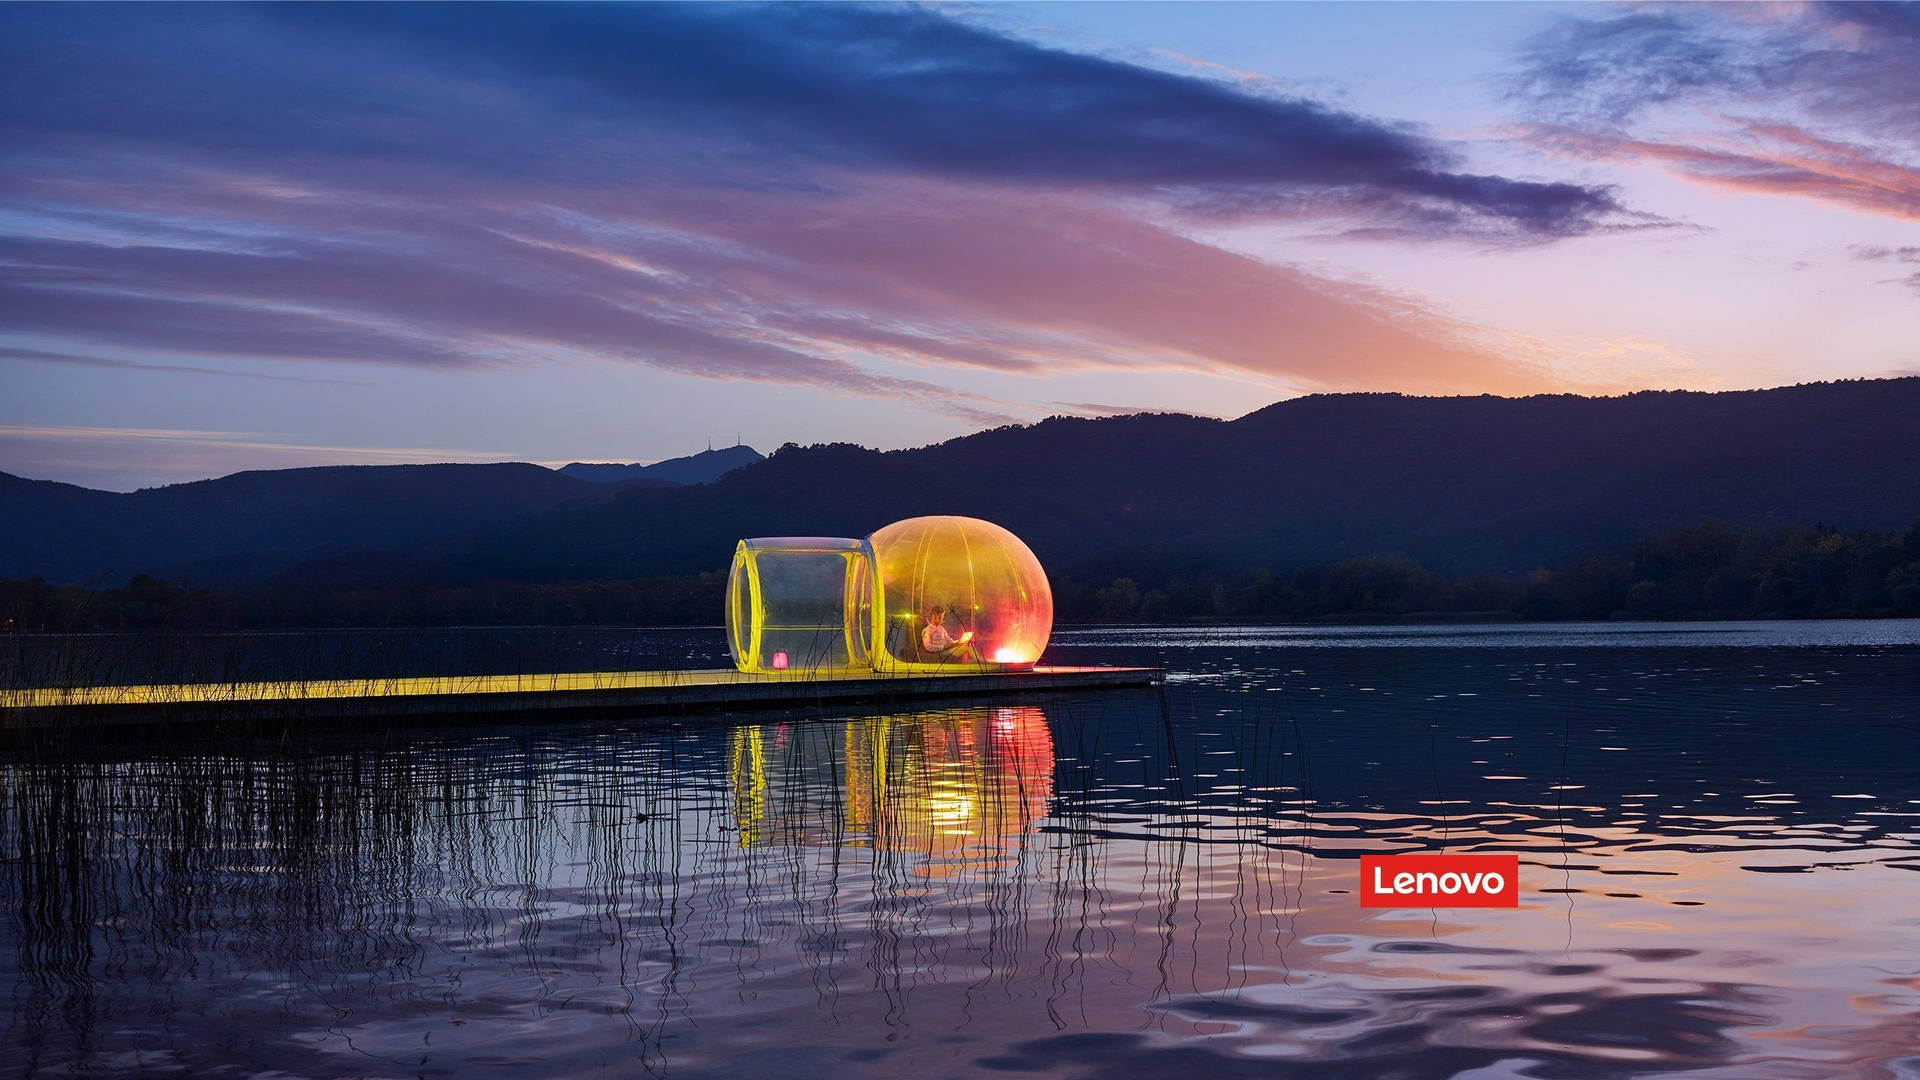 Caption: Impressive Lenovo Official Technology in Flawless Bubble Dome Design Wallpaper